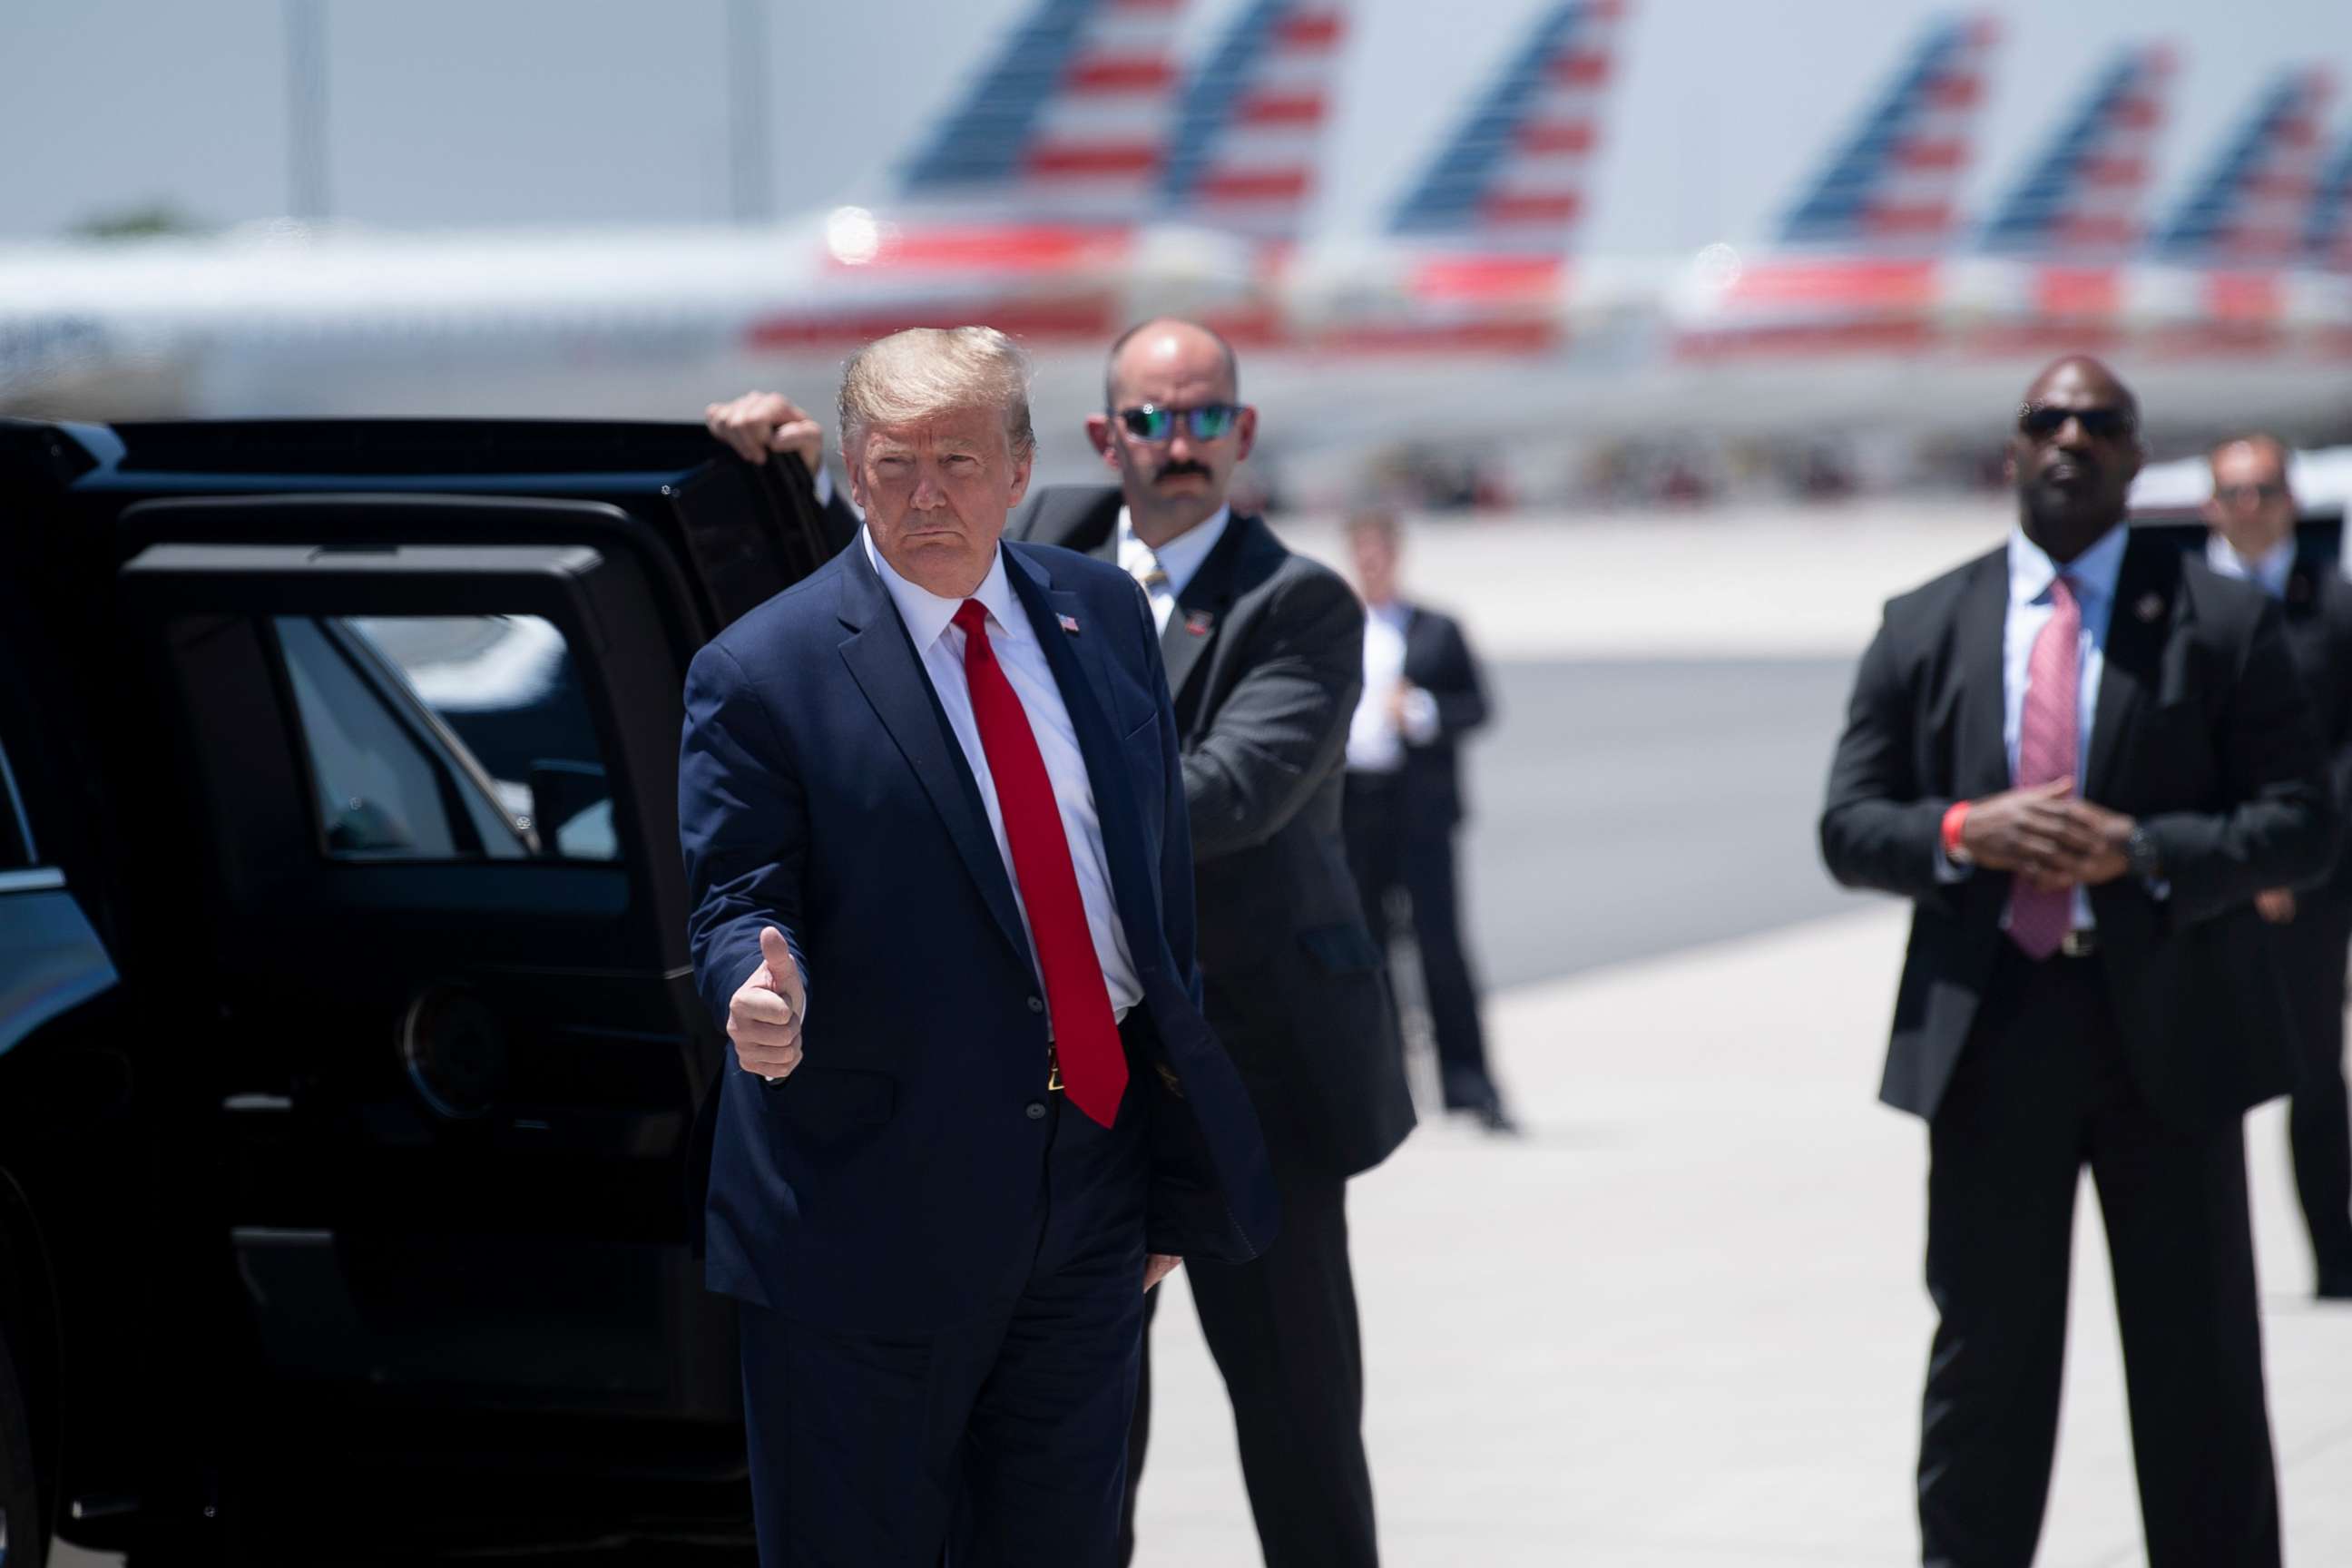 PHOTO: President Donald Trump arrives at Phoenix Sky Harbor Airport during his first trip since widespread COVID-19 related lockdowns went into effect, May 5, 2020, in Phoenix.